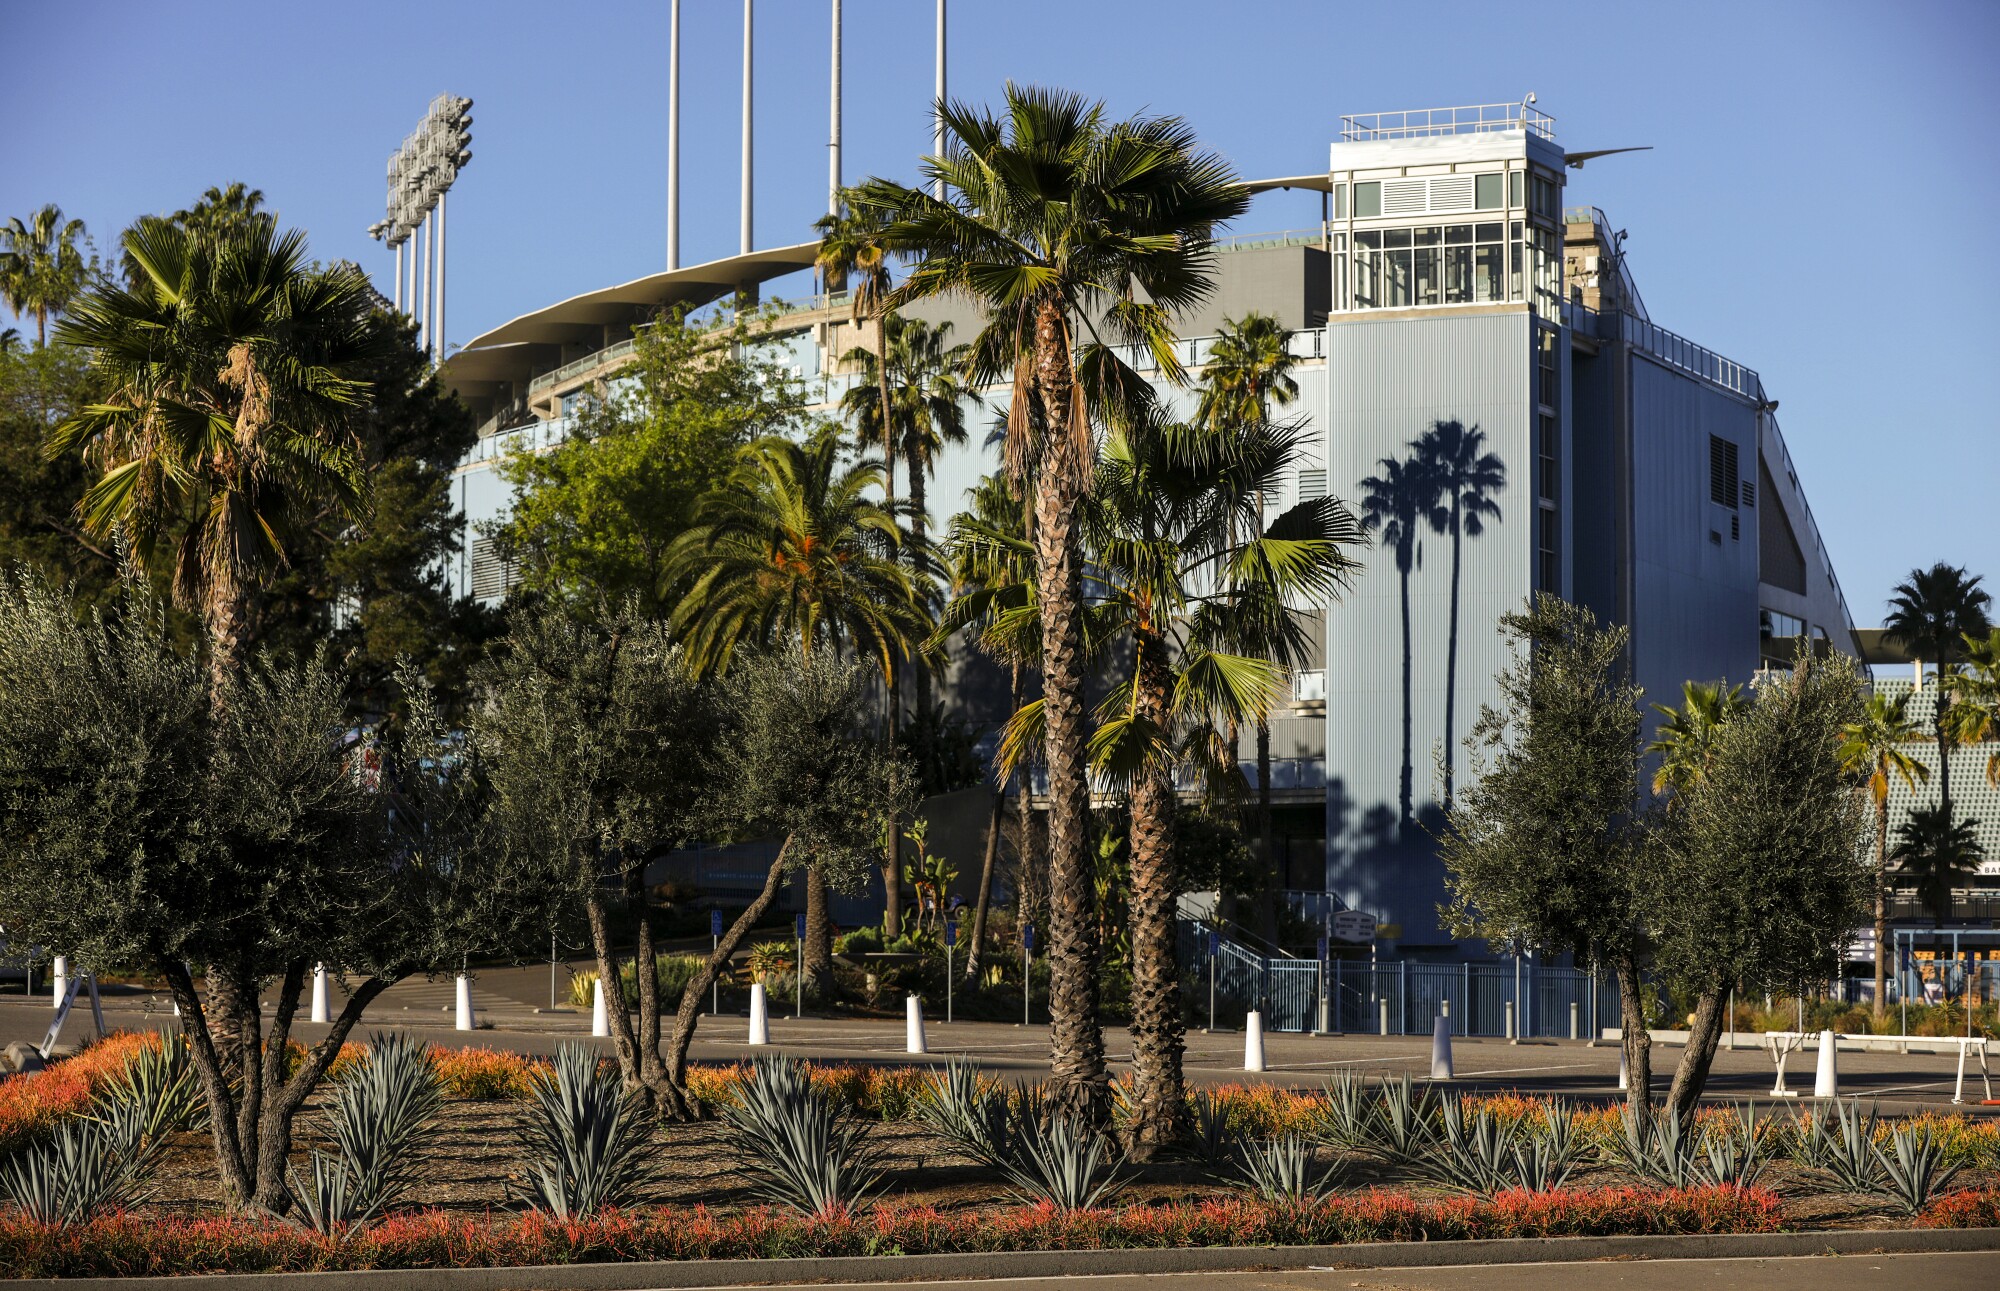 A parking island filled with agave and palm trees in front of Dodger Stadium